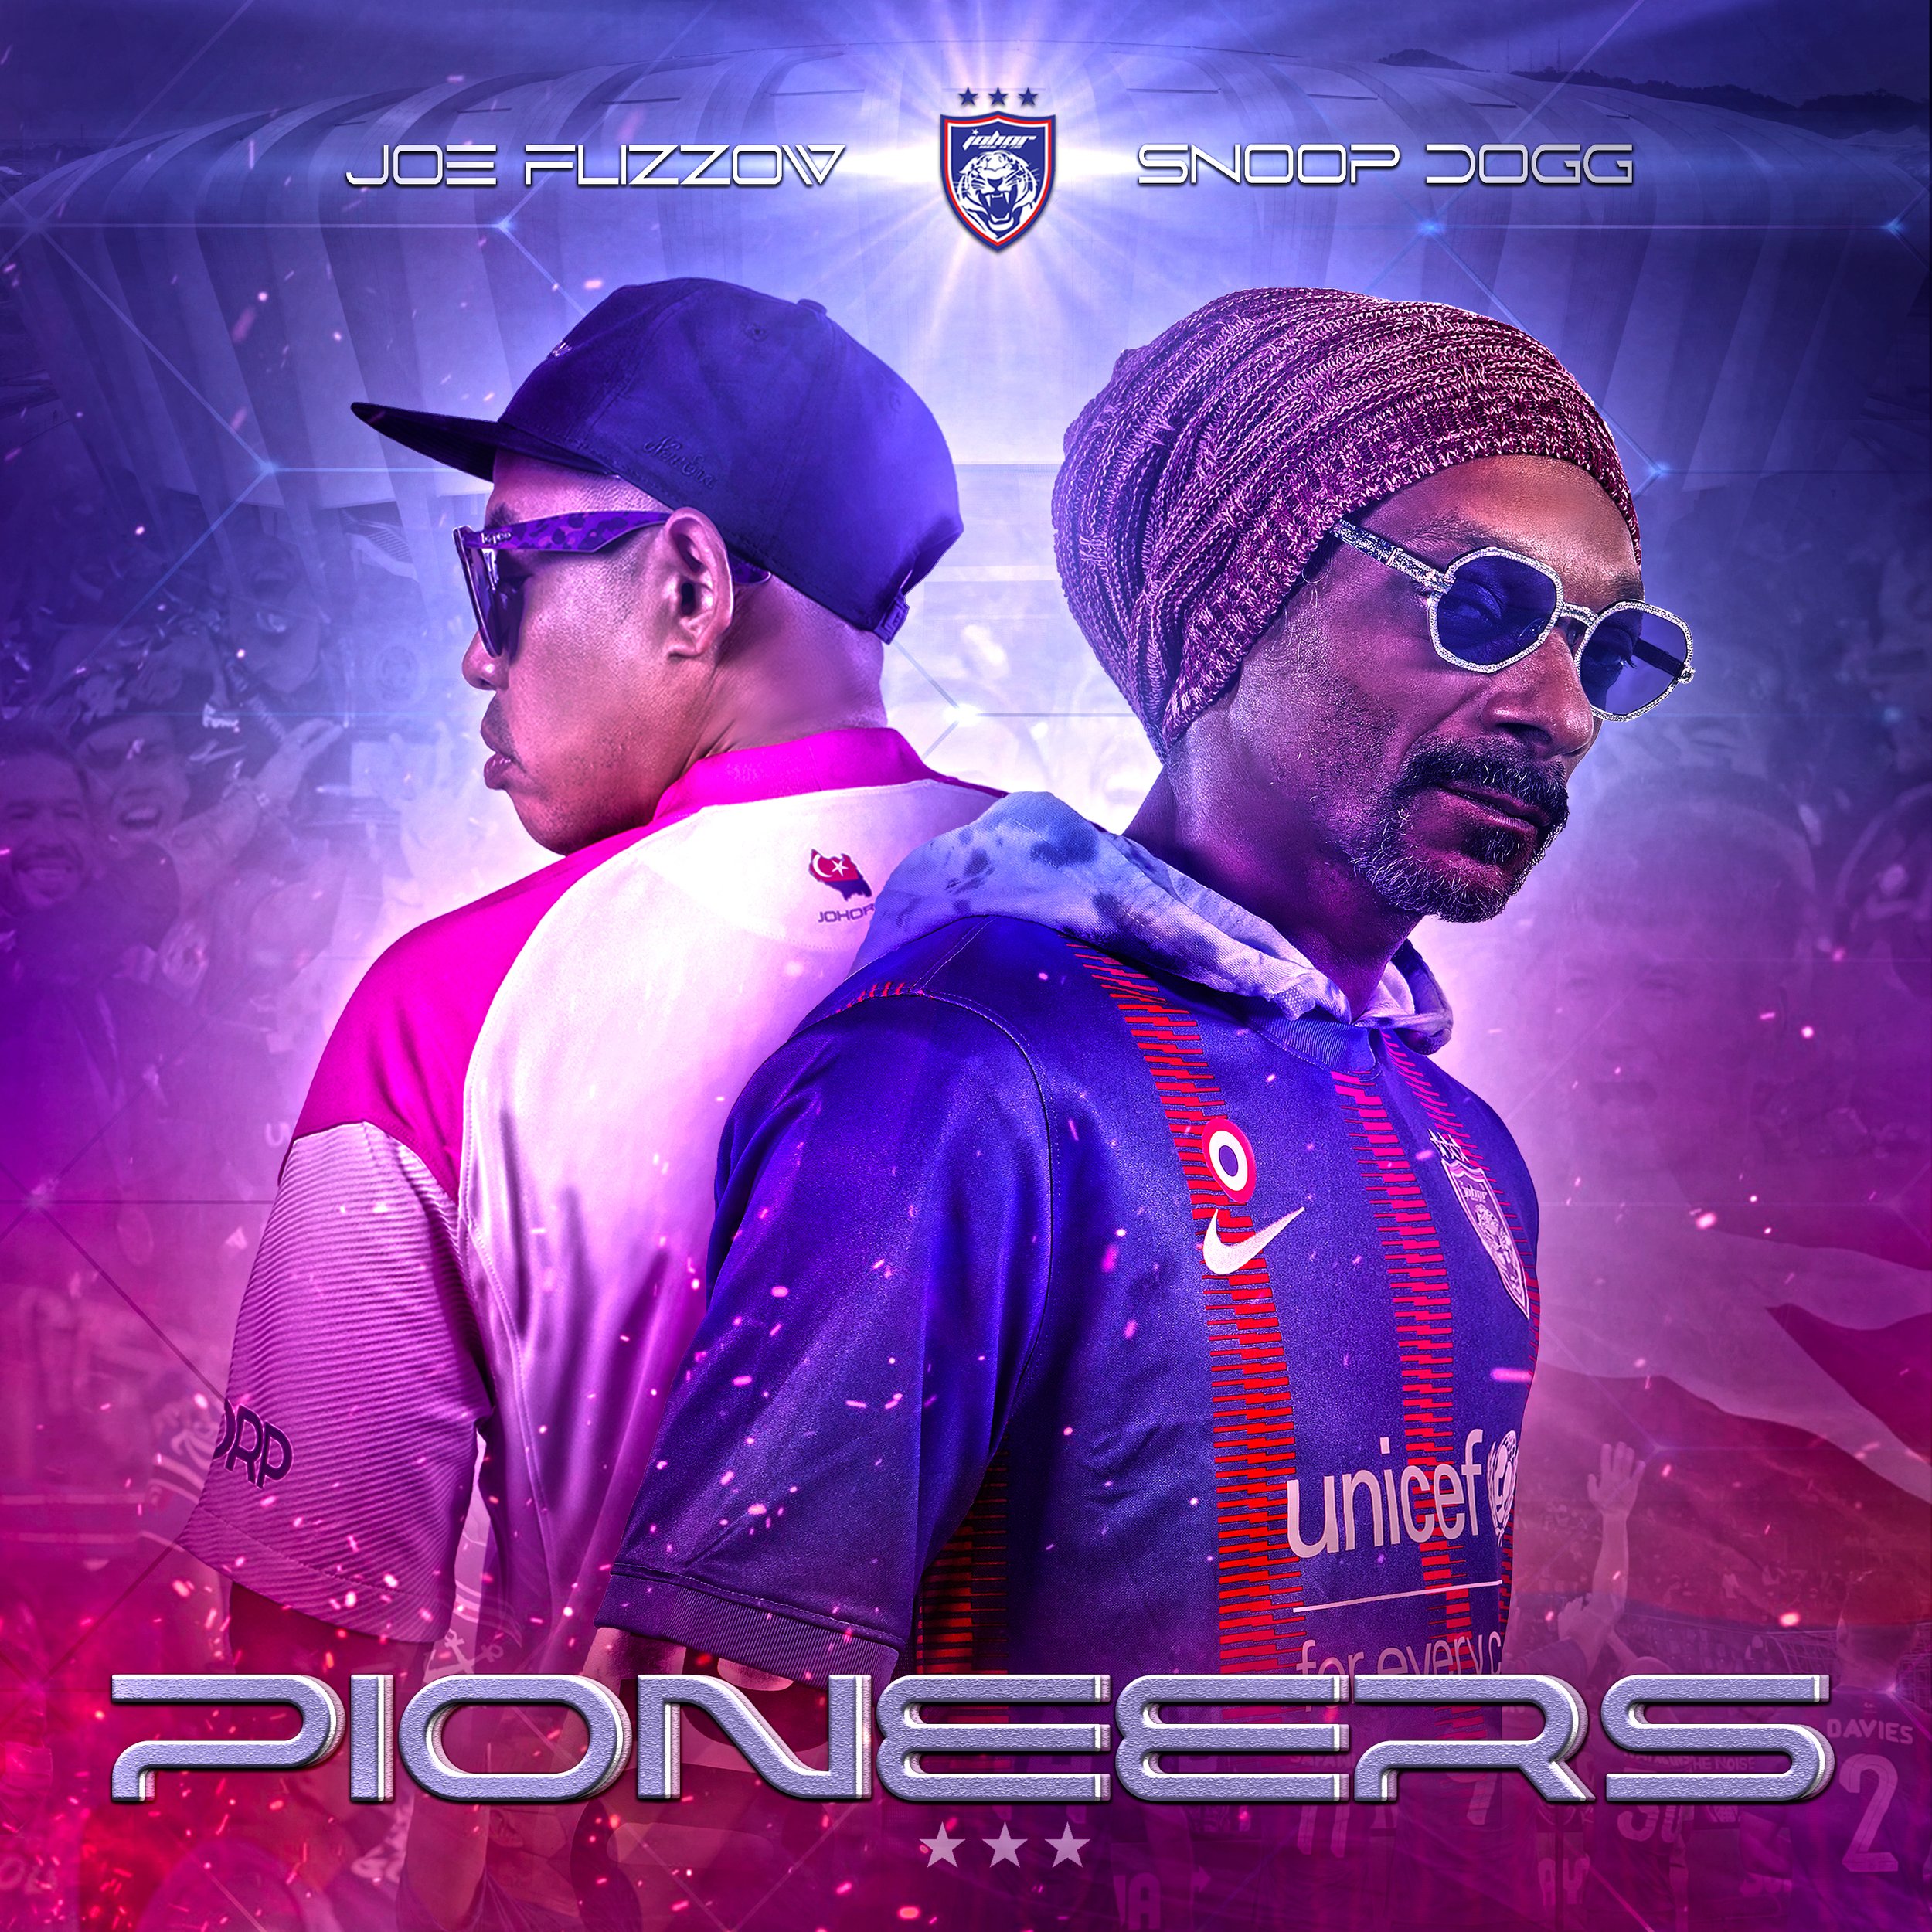 Snoop Dogg and Joe Flizzows just drop the official theme song for JDT Football Club — Hashtag Magazine